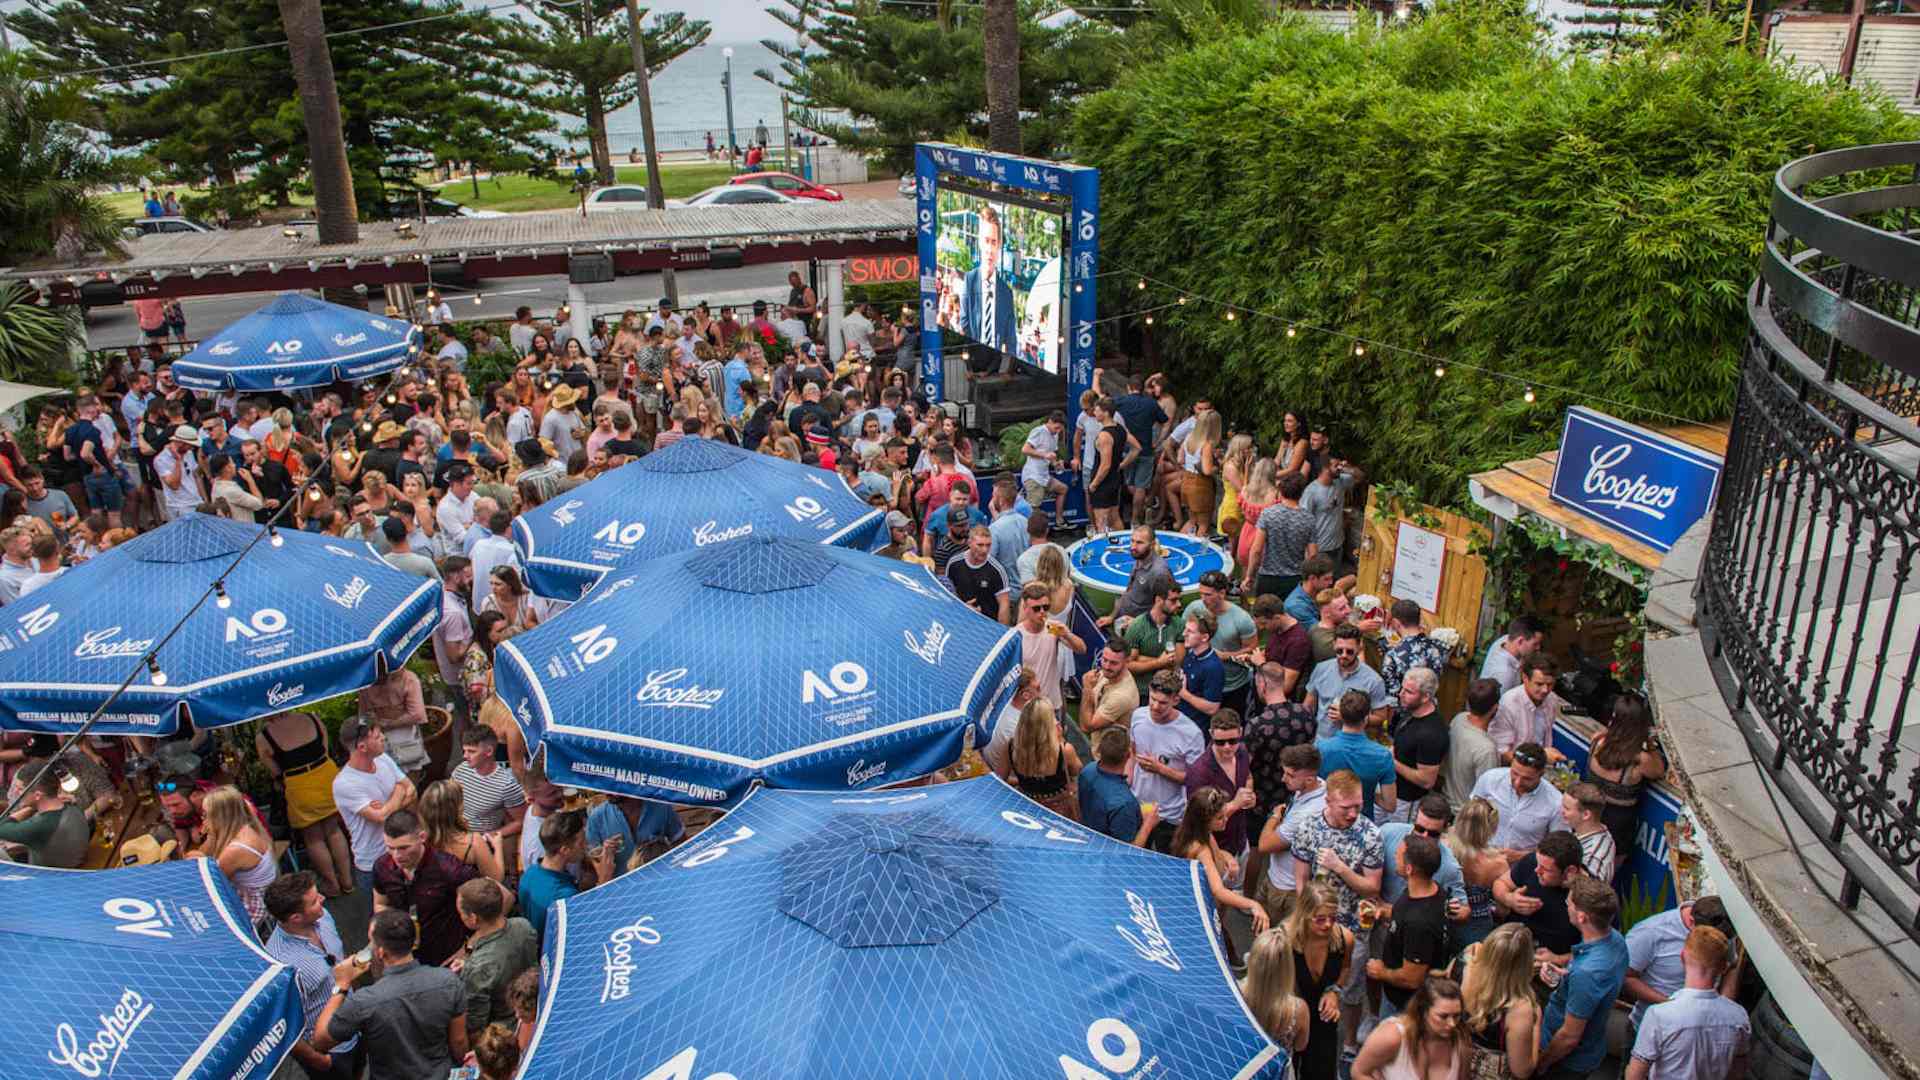 Five Ways to Get into the Australian Open Spirit If You Can't Make It to Melbourne